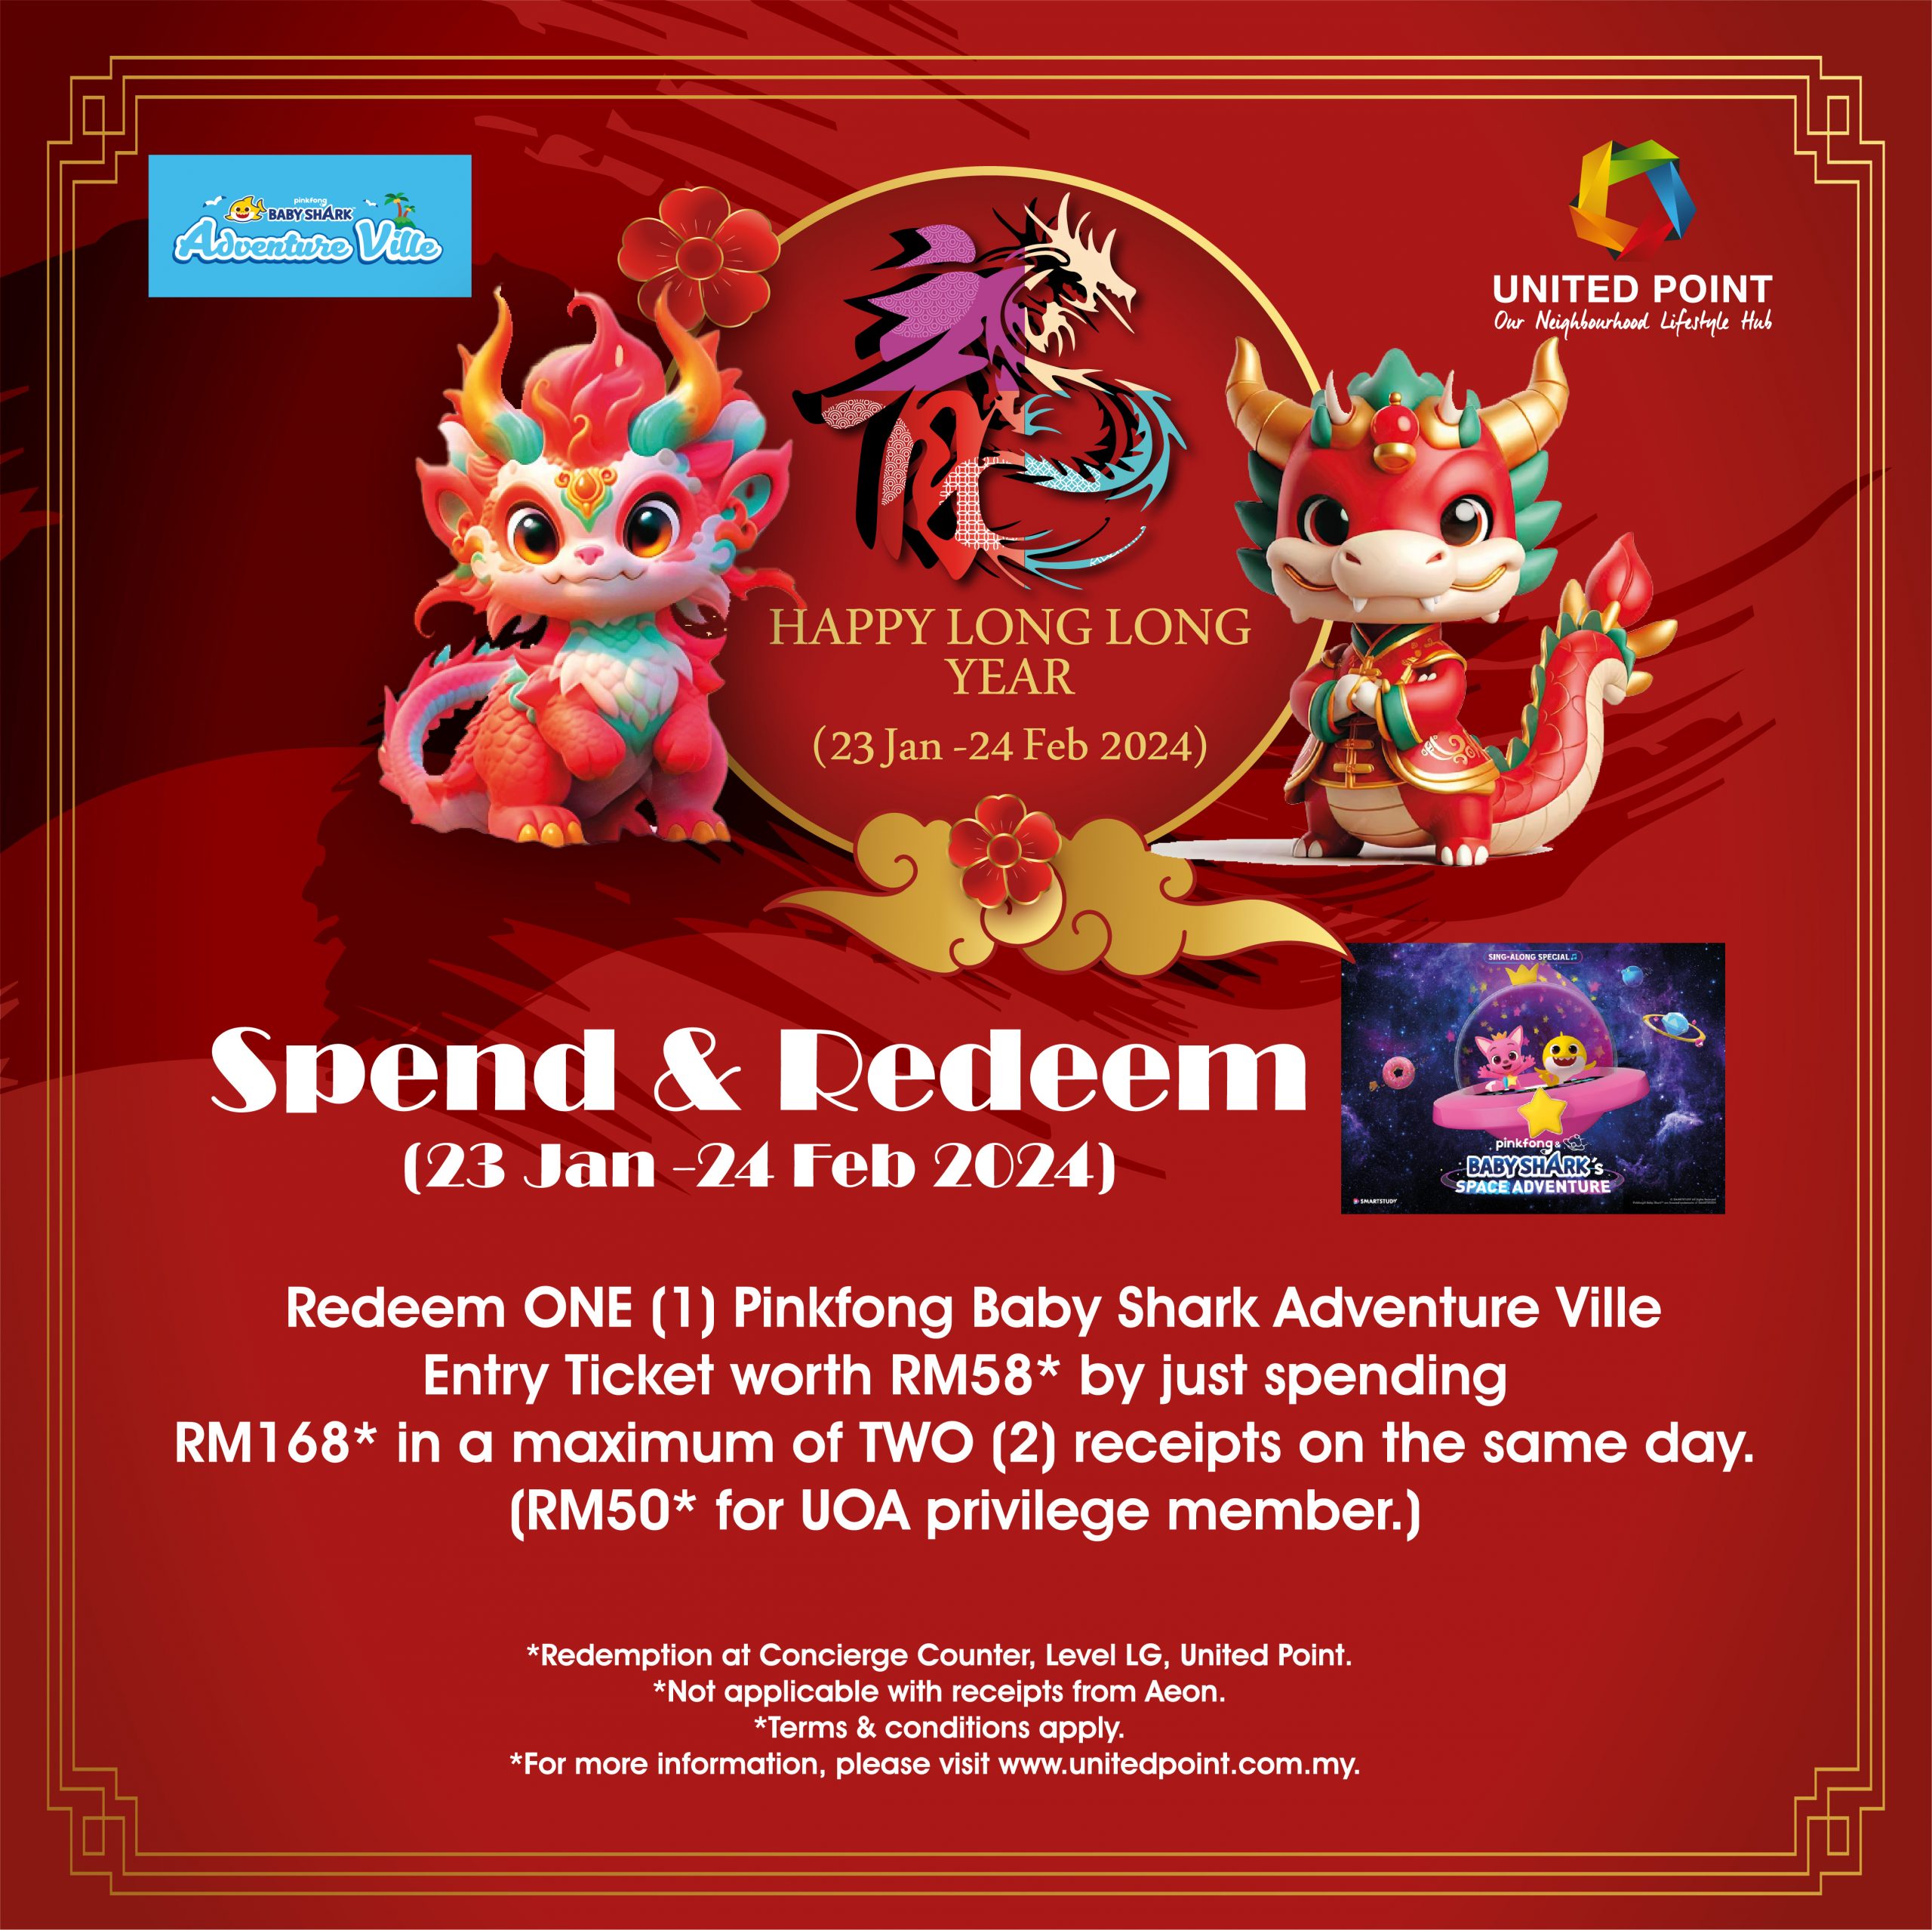 Happy Long Long Year – Spend & Redeem, Event Highlights and Spend & Win Contest